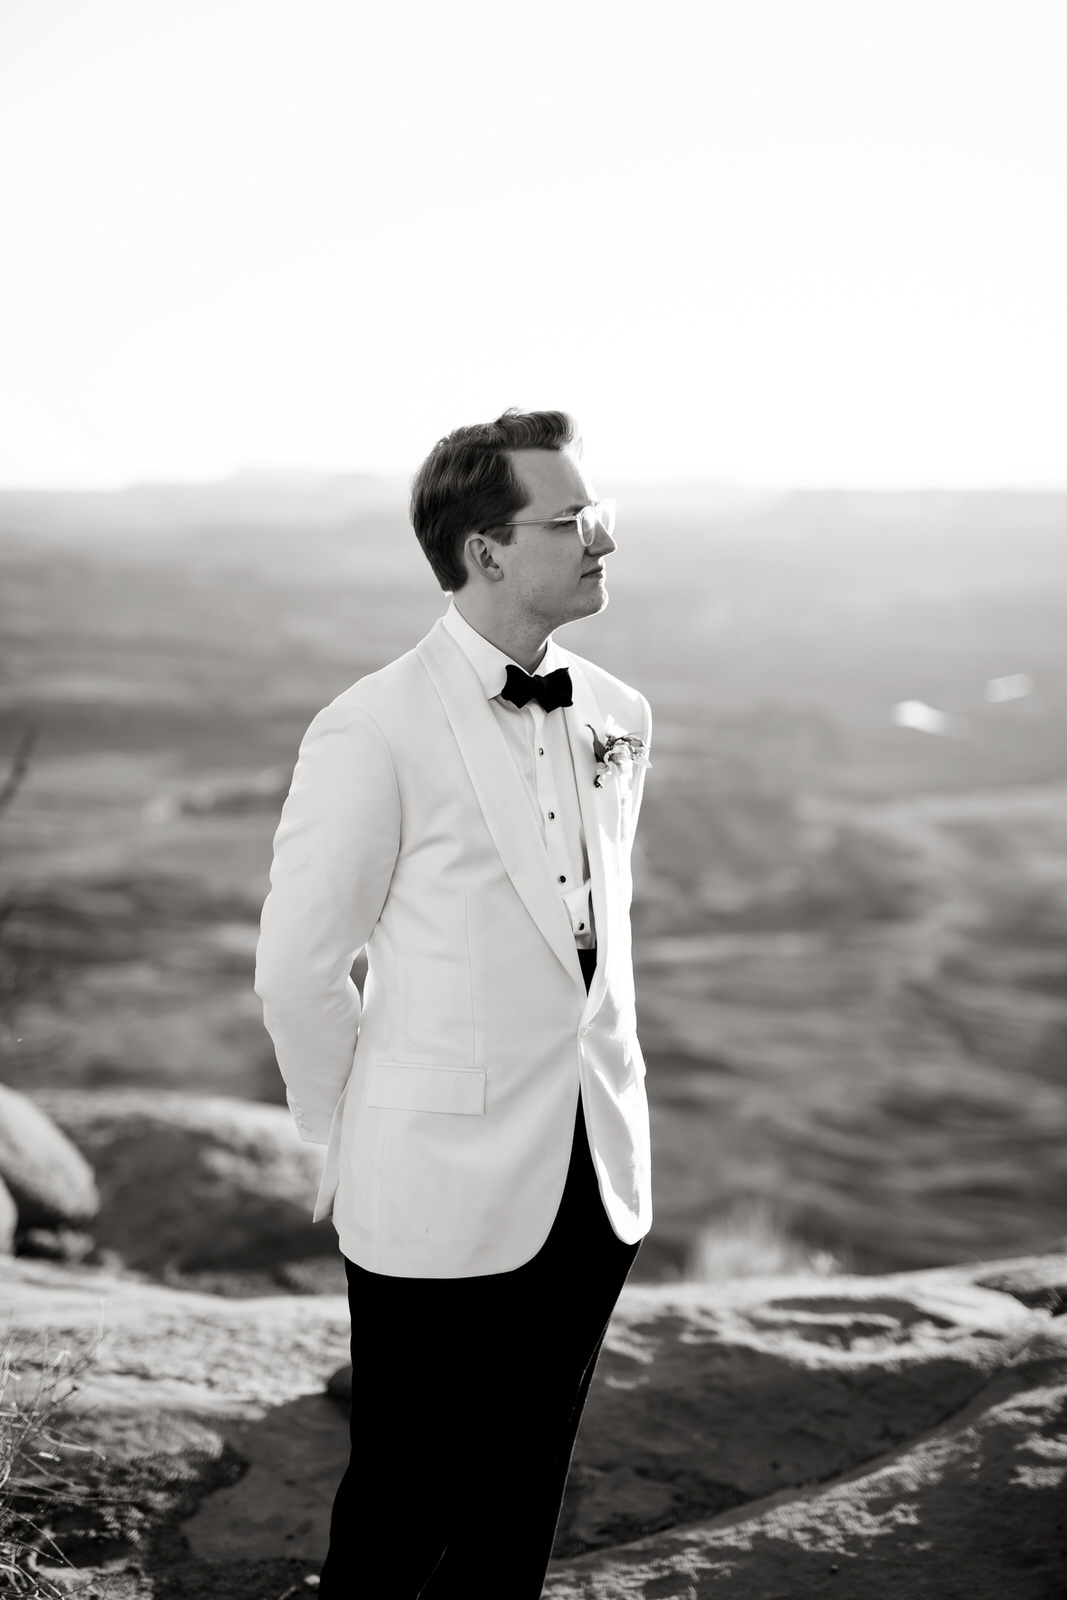 A portrait of a young groom wearing a white suit with a black bowtie.